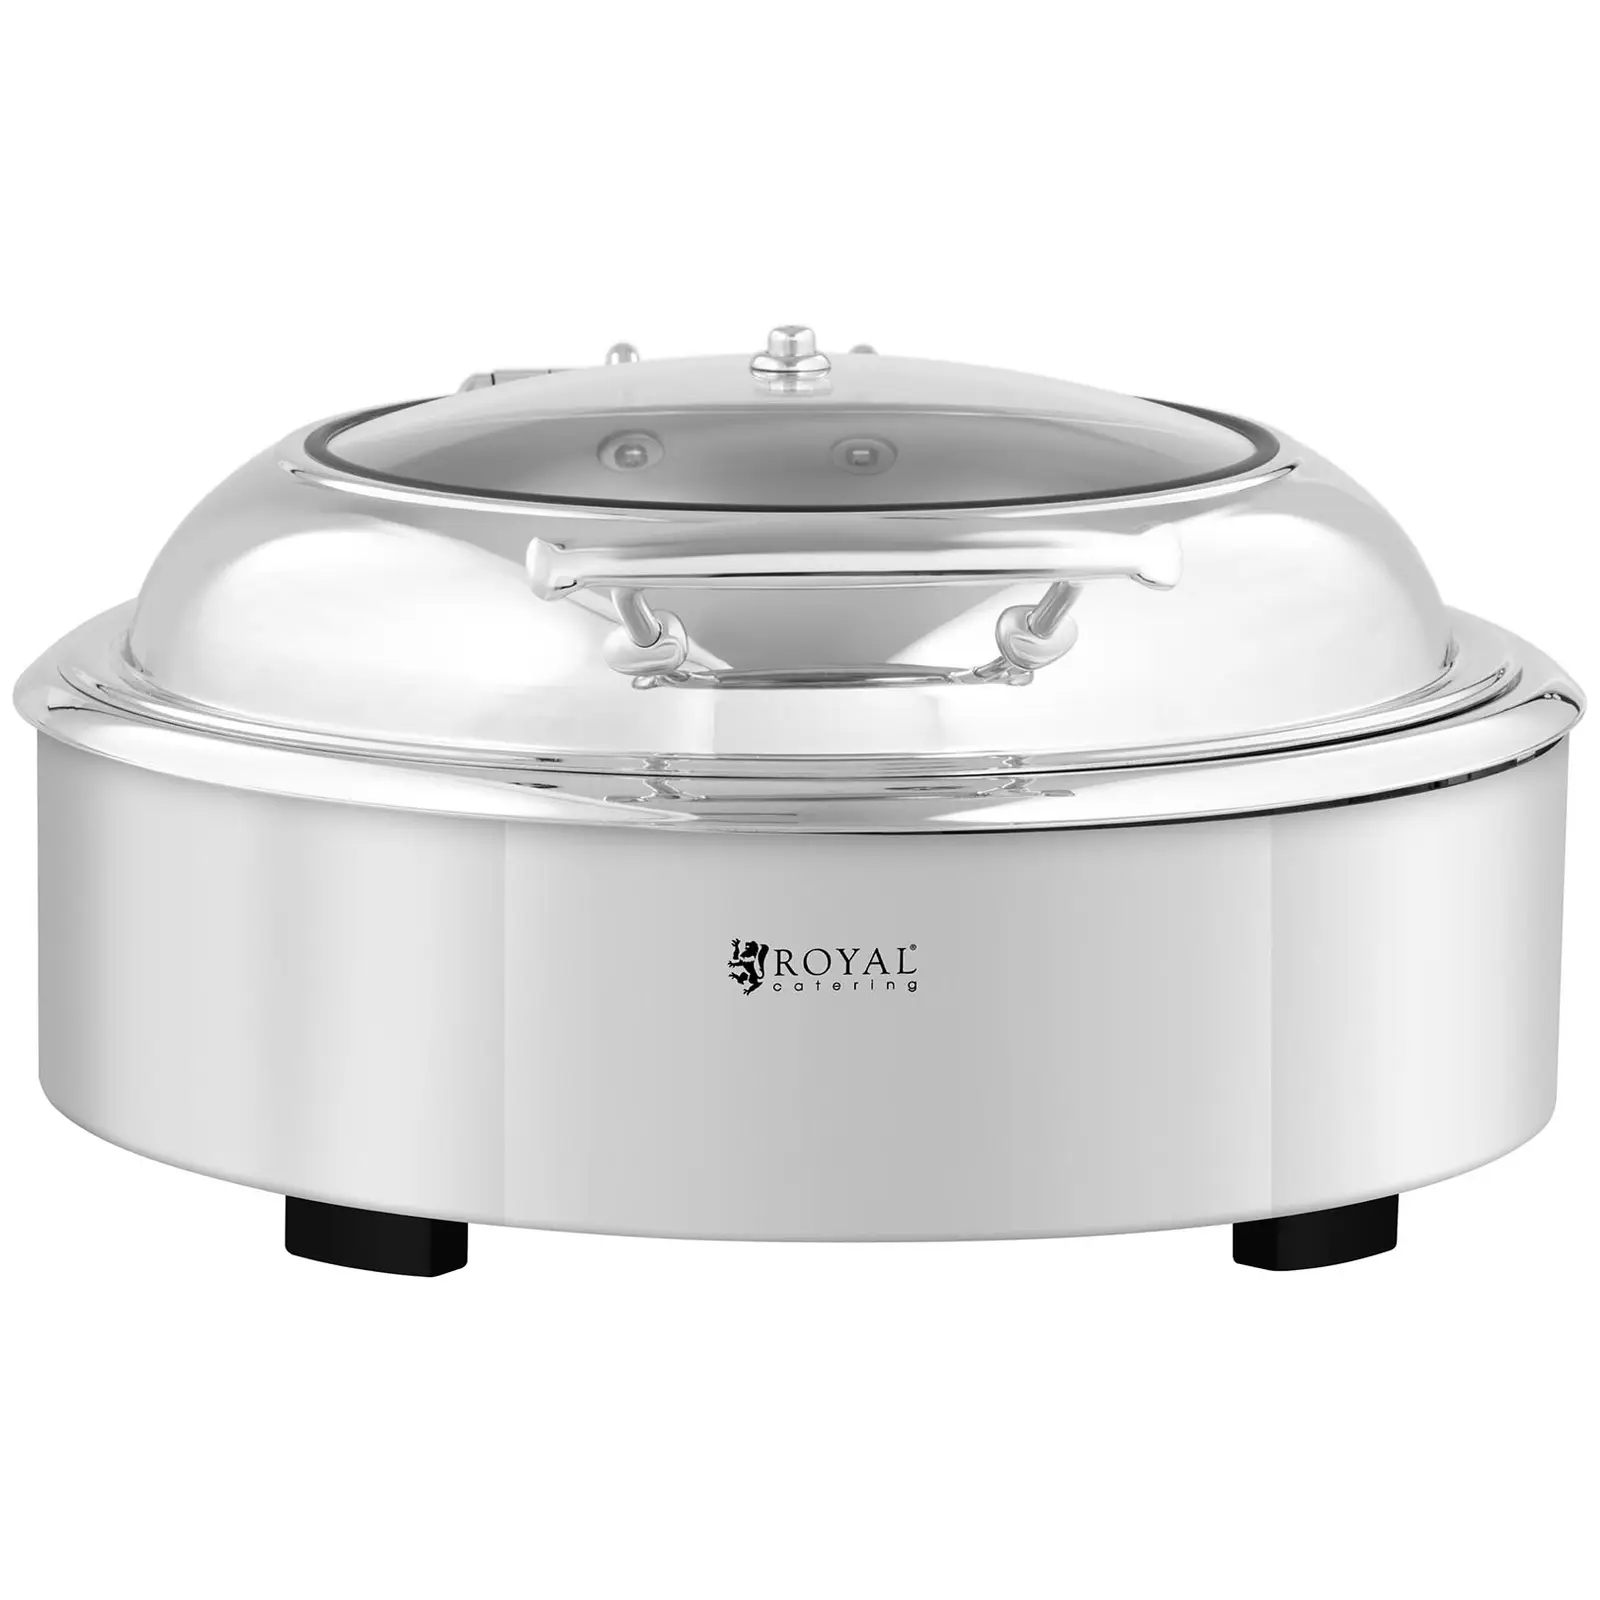 Chafing dish rond avec hublot - Royal Catering - 5,5 l